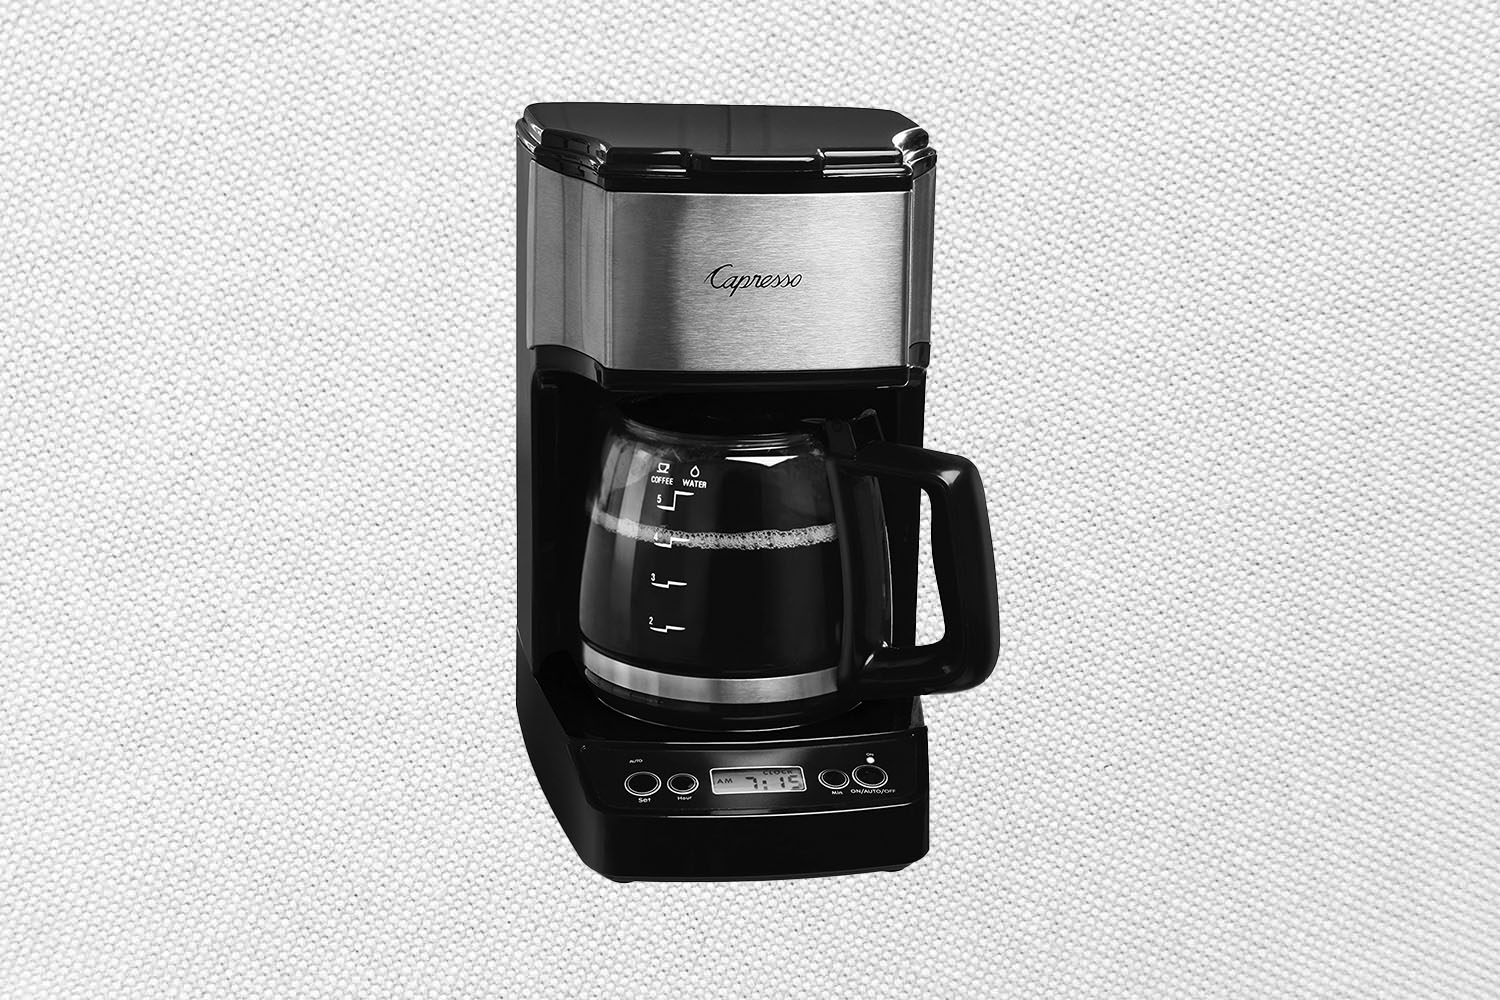 KRUPS ET351 Coffee Maker, Coffee Programmable Maker, Thermal Carafe, 12  Cup, Black